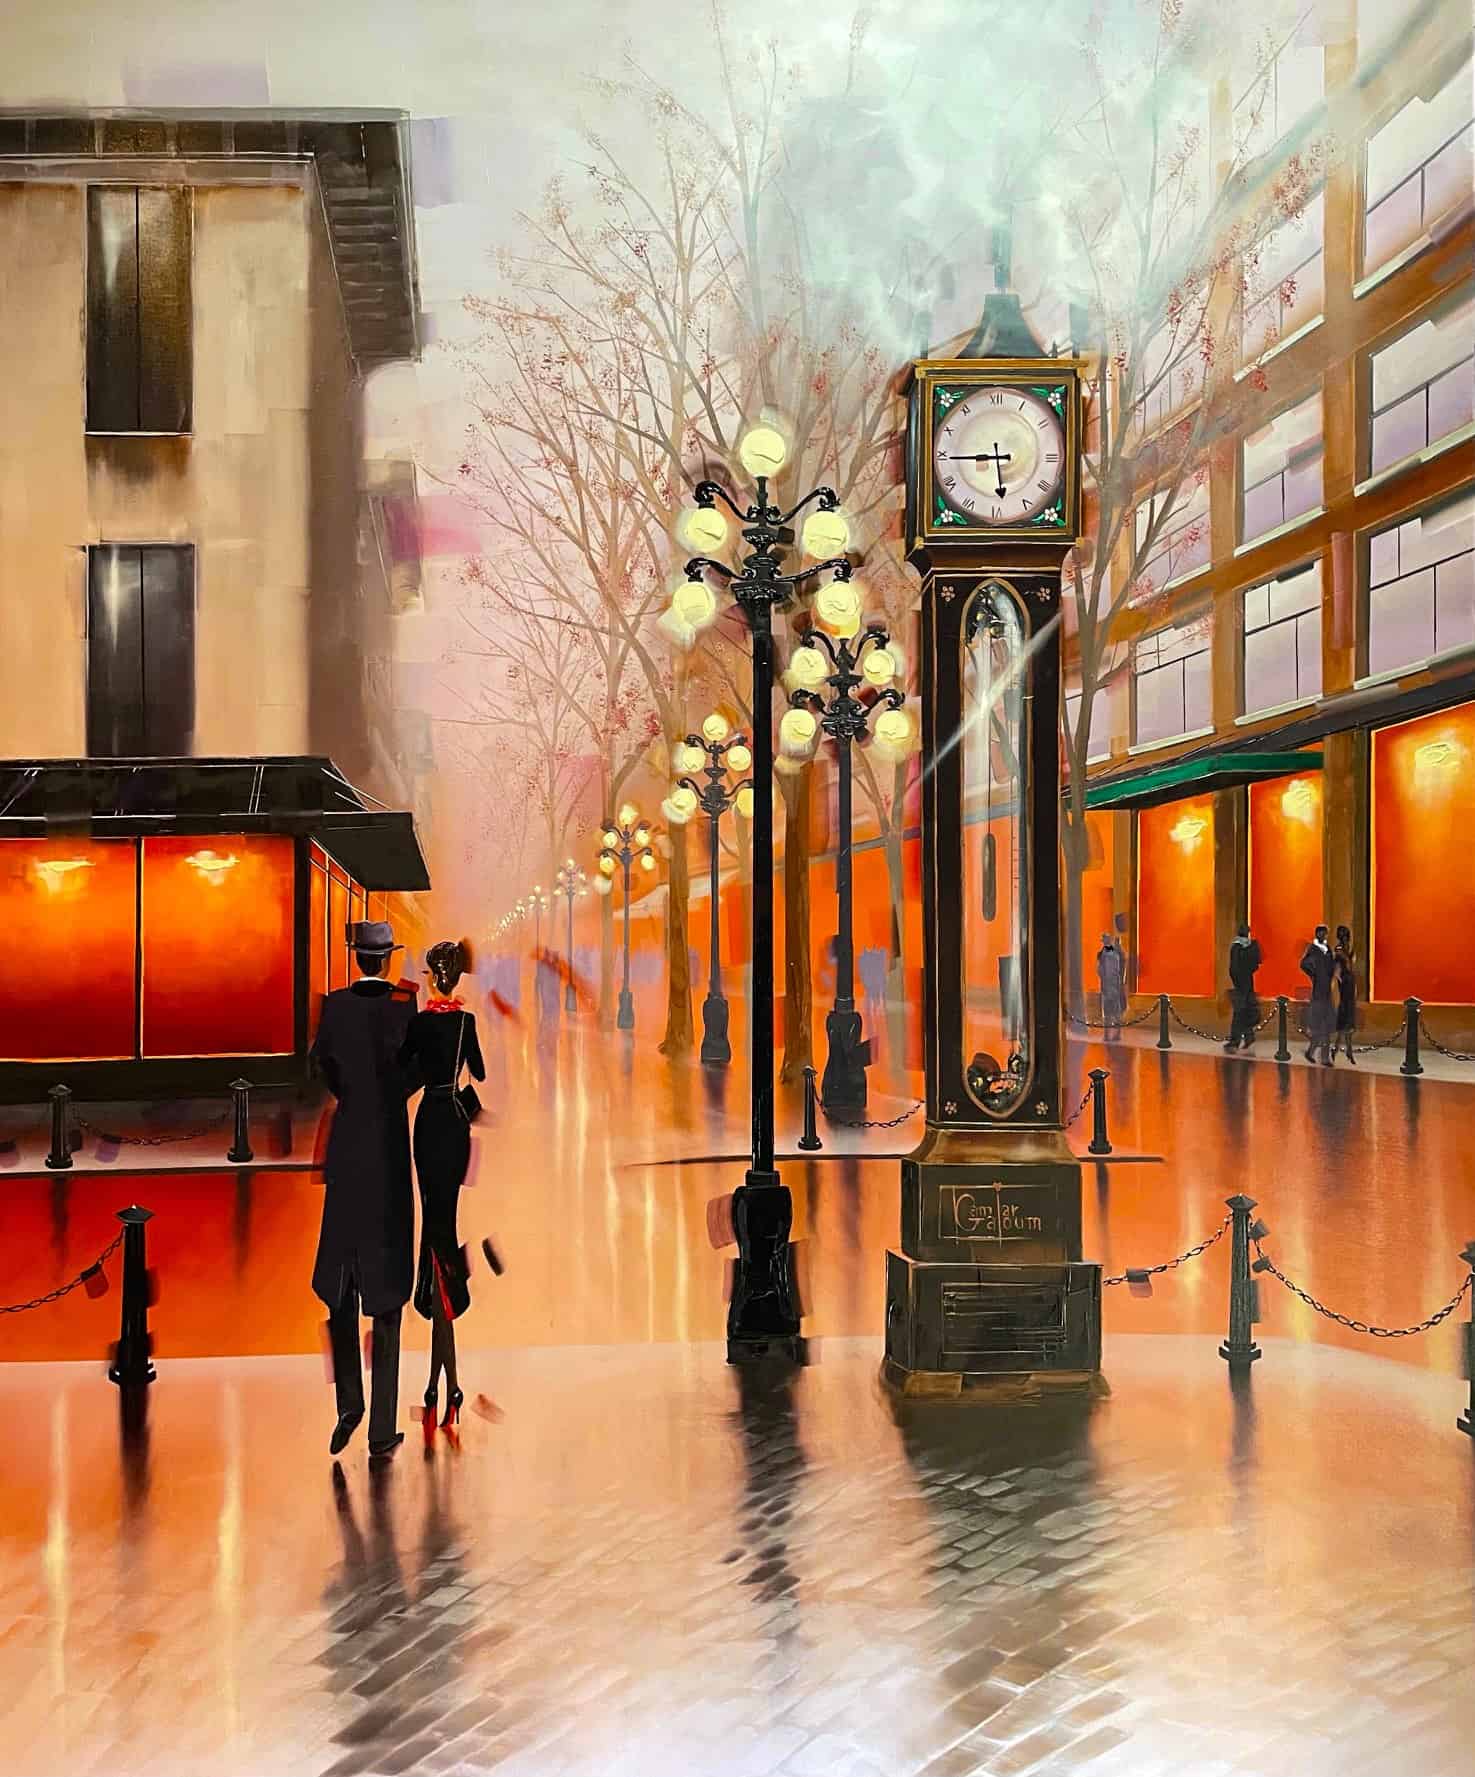 Contemporary Art. Title: Steam Clock Reflection, Oil on Canvas, 60 x 48 in by Canadian Artist Kamiar Gajoum.